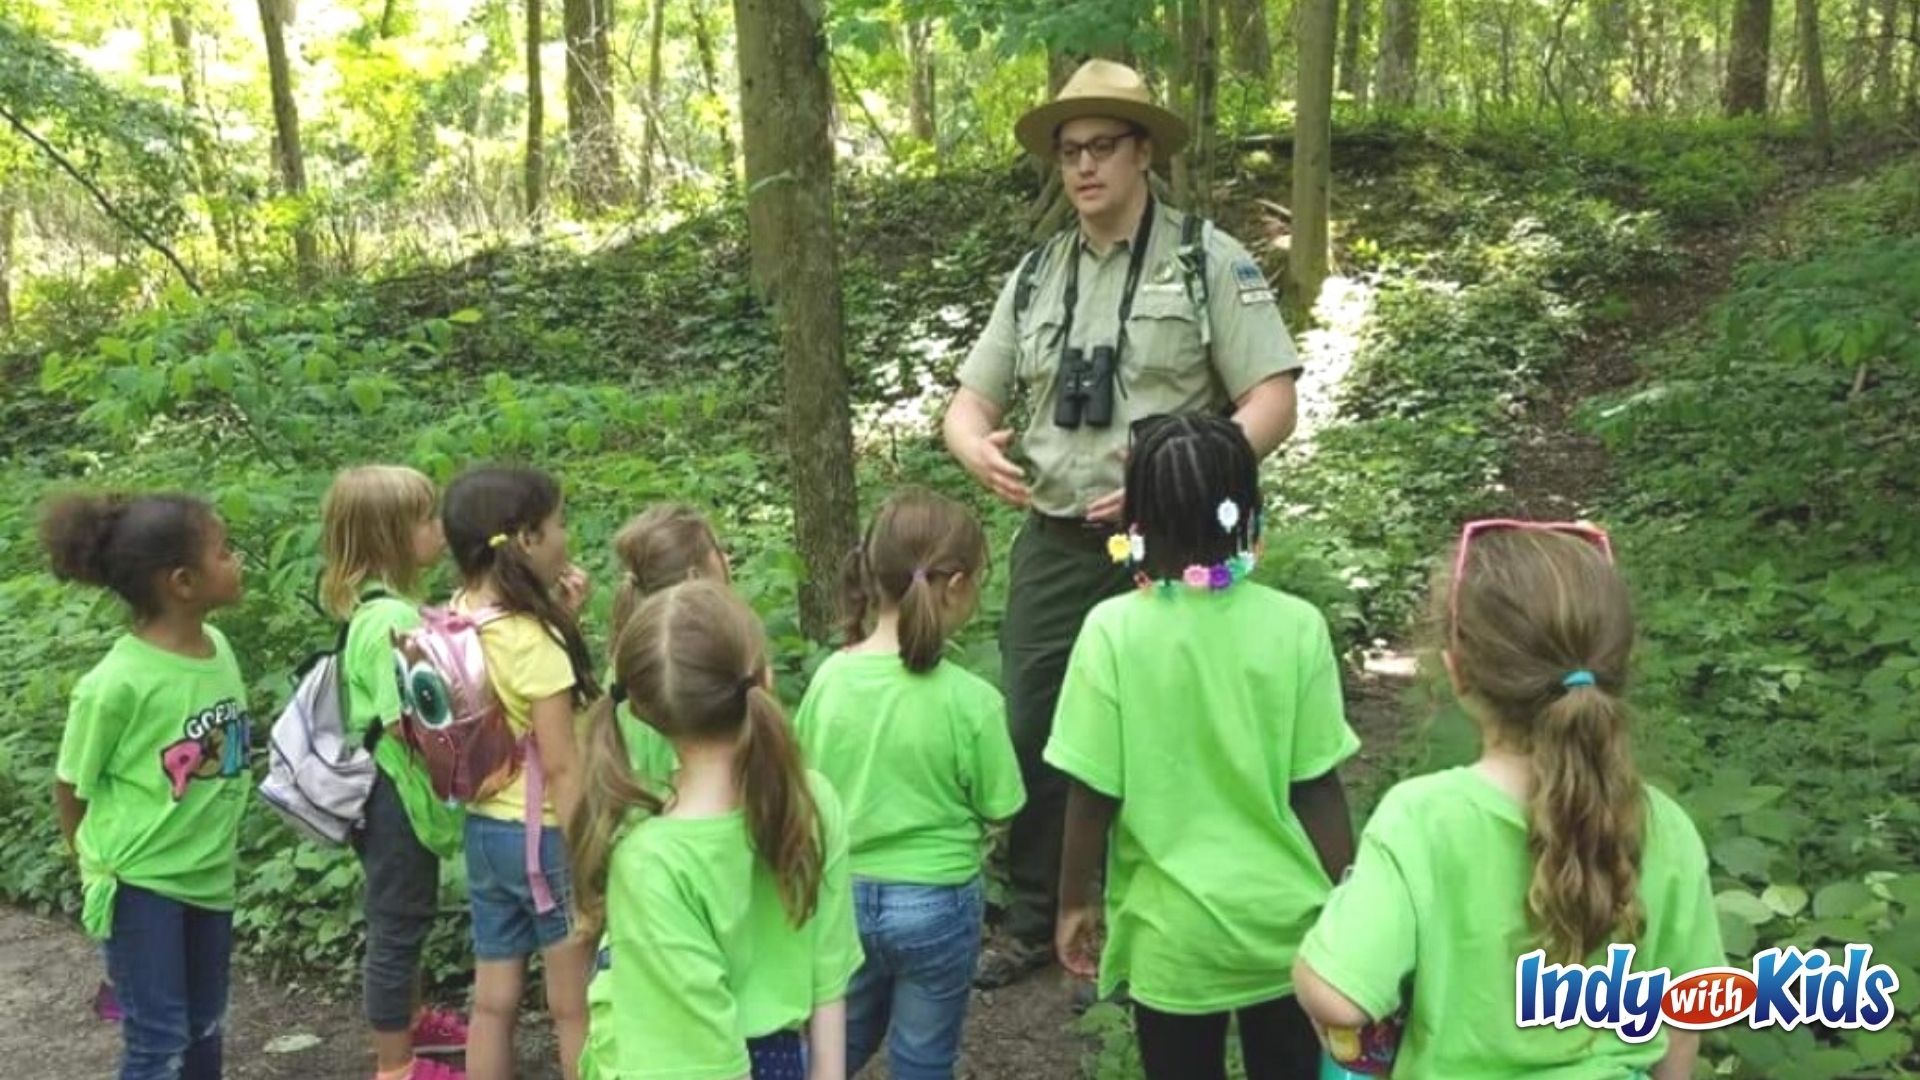 A group of students in matching lime green shirts listen attentively to a park ranger's presentation at Fort Harrison State Park.